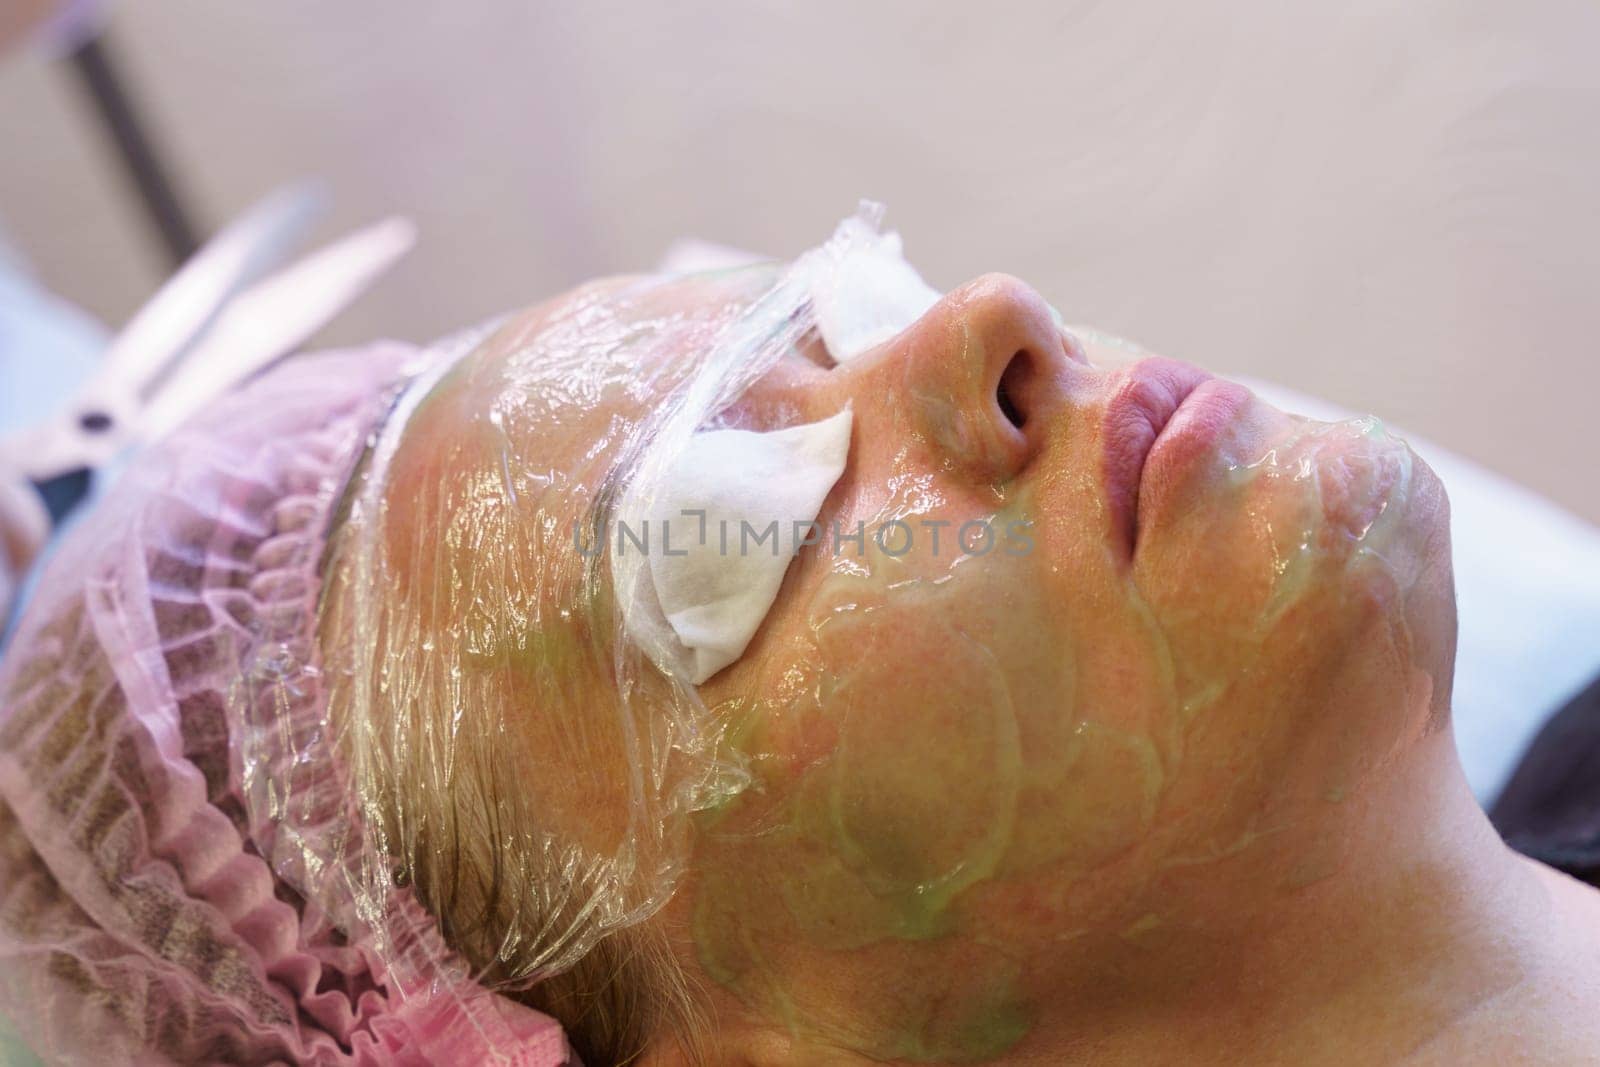 A woman having a facial mask applied to her face in a spa setting for skin rejuvenation and cleansing.